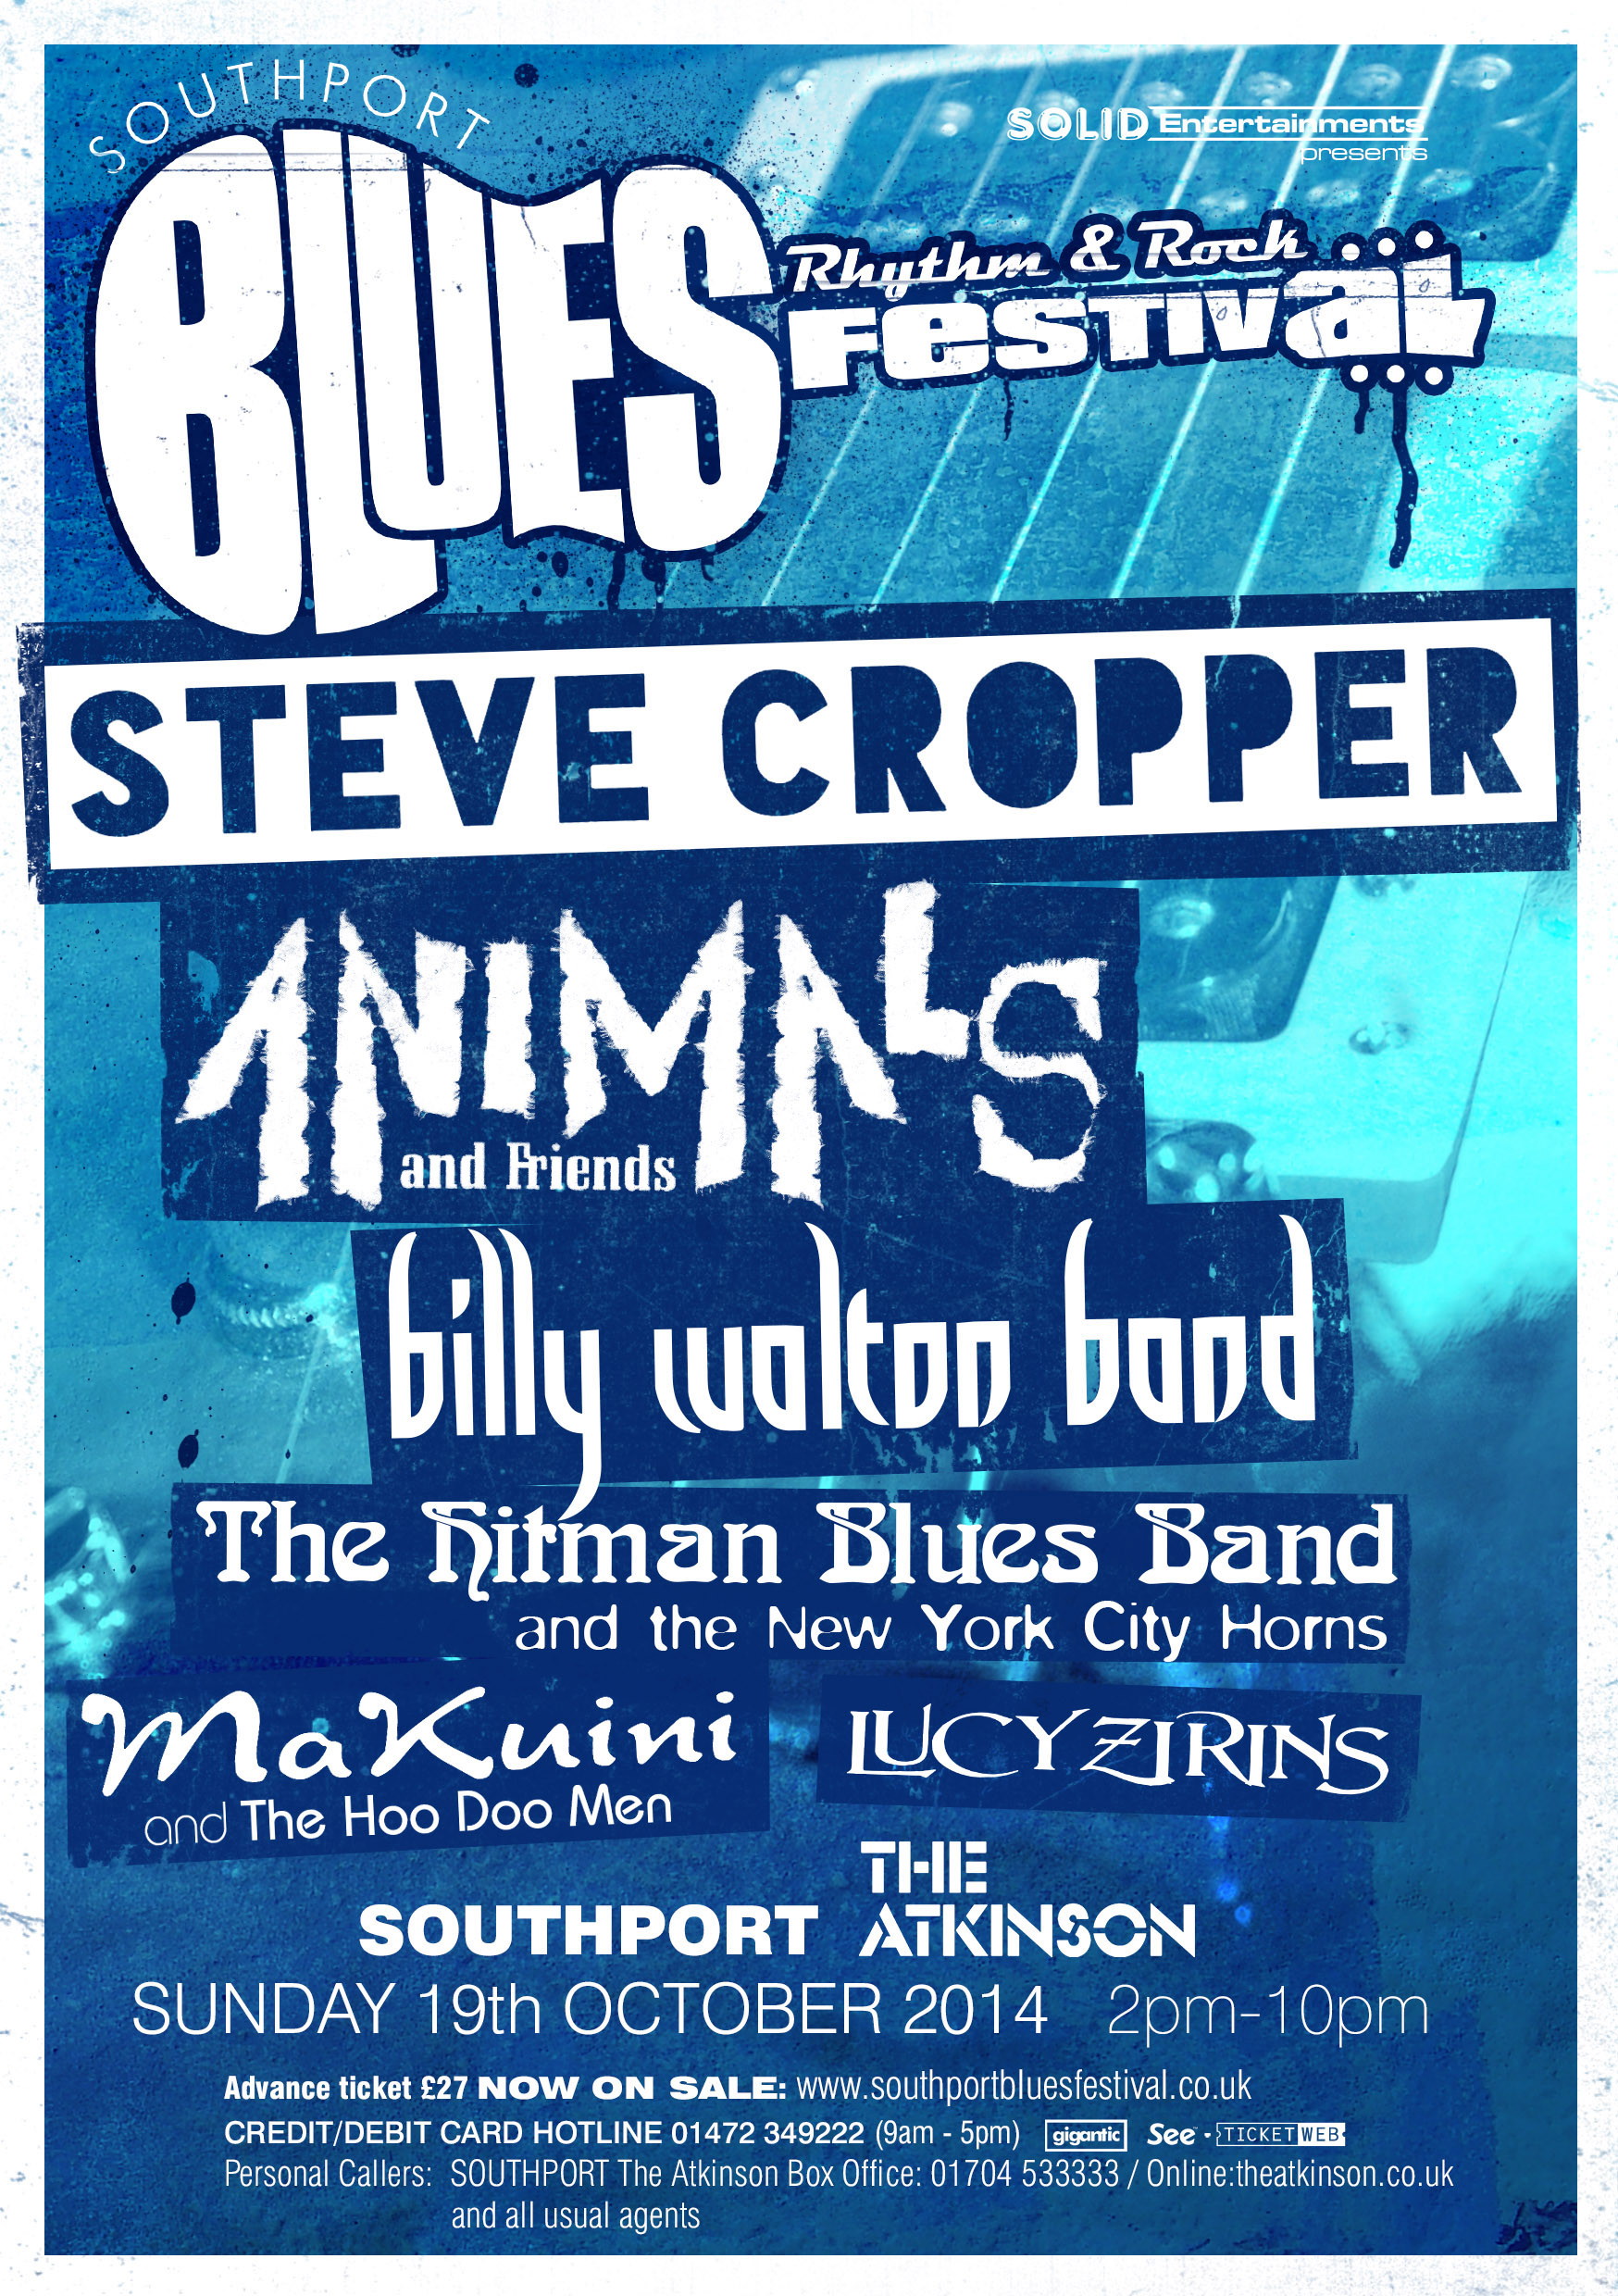 Full LineUp for Southport Rhythm & Blues Festival is Announced The